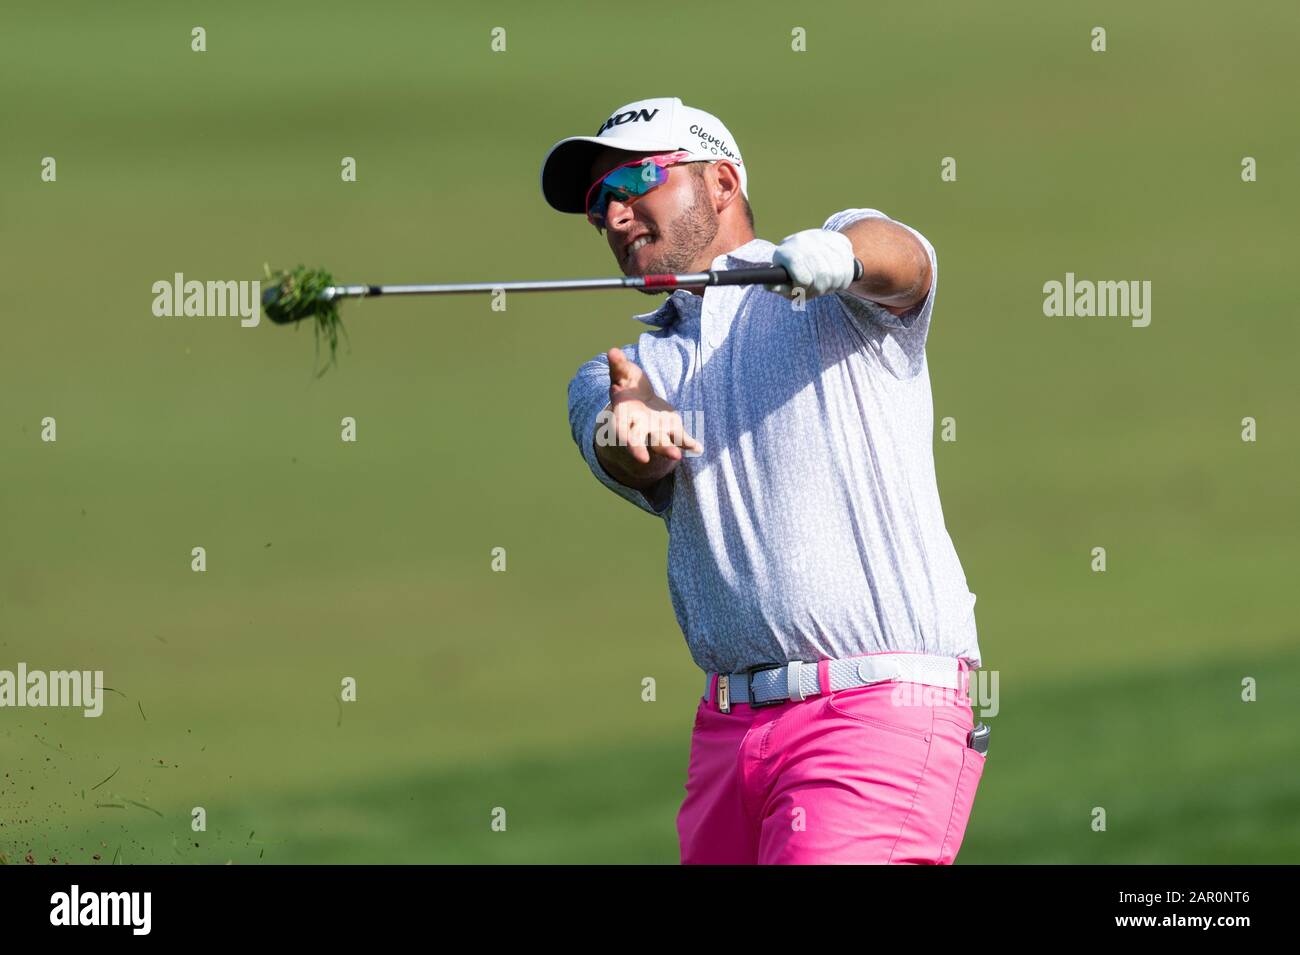 Dean Burmester of South Africa plays a shot to the eighth green in round 3  during the PGA European Tour Dubai Desert Classic at Emirates Golf Club,  Dubai, UAE on 25 January